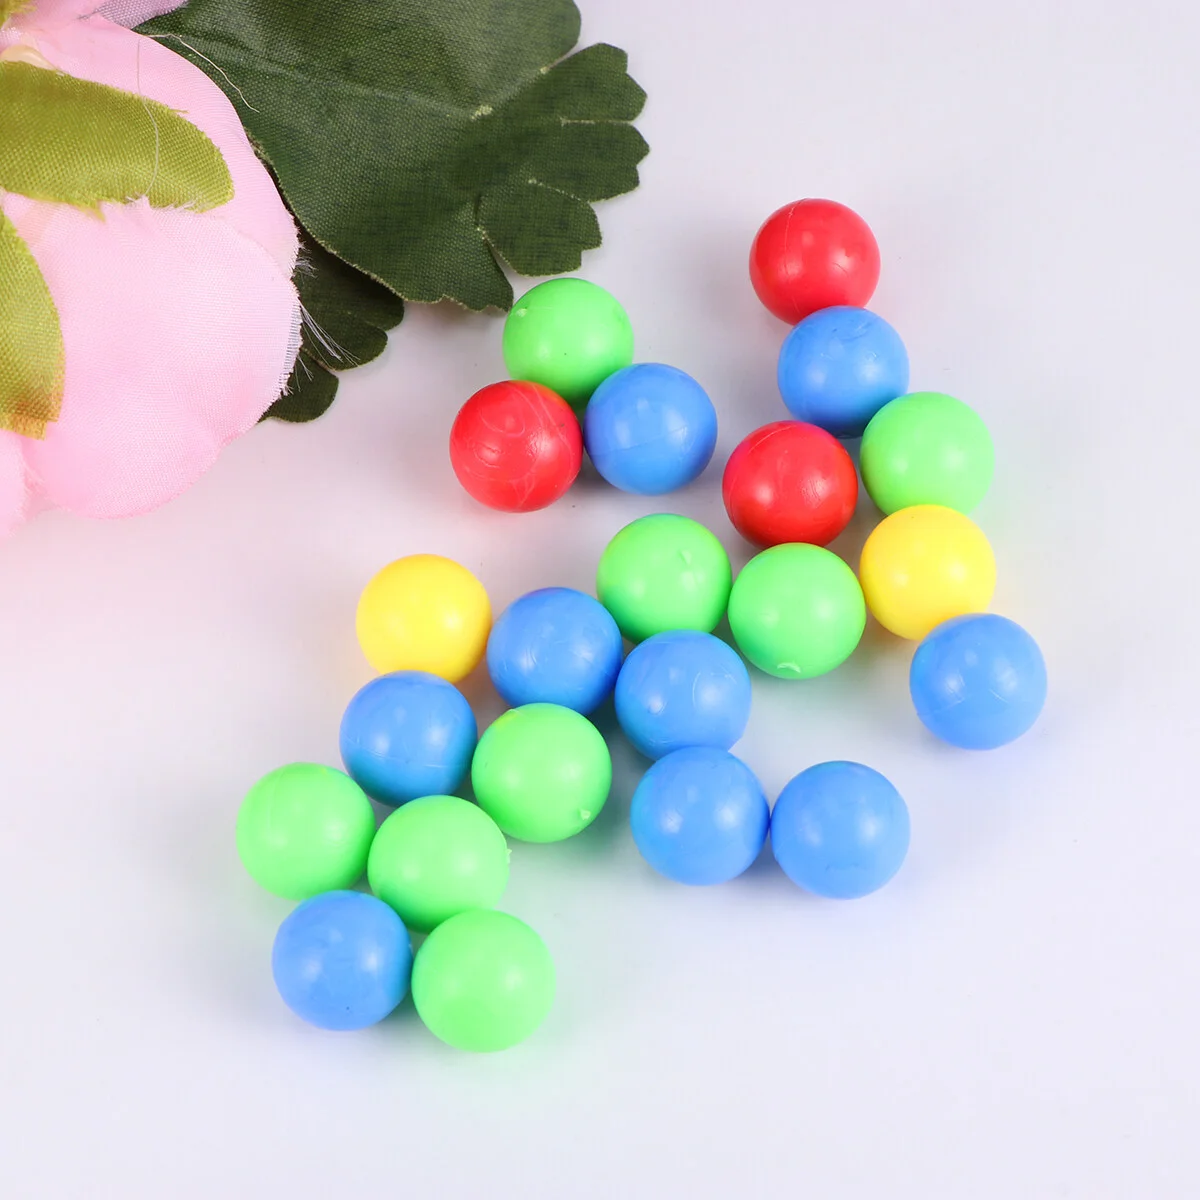 

About 120pcs Beads Game Replacement: Colorful Bead Game Balls Replacement Marbles Balls Compatible for Hungry